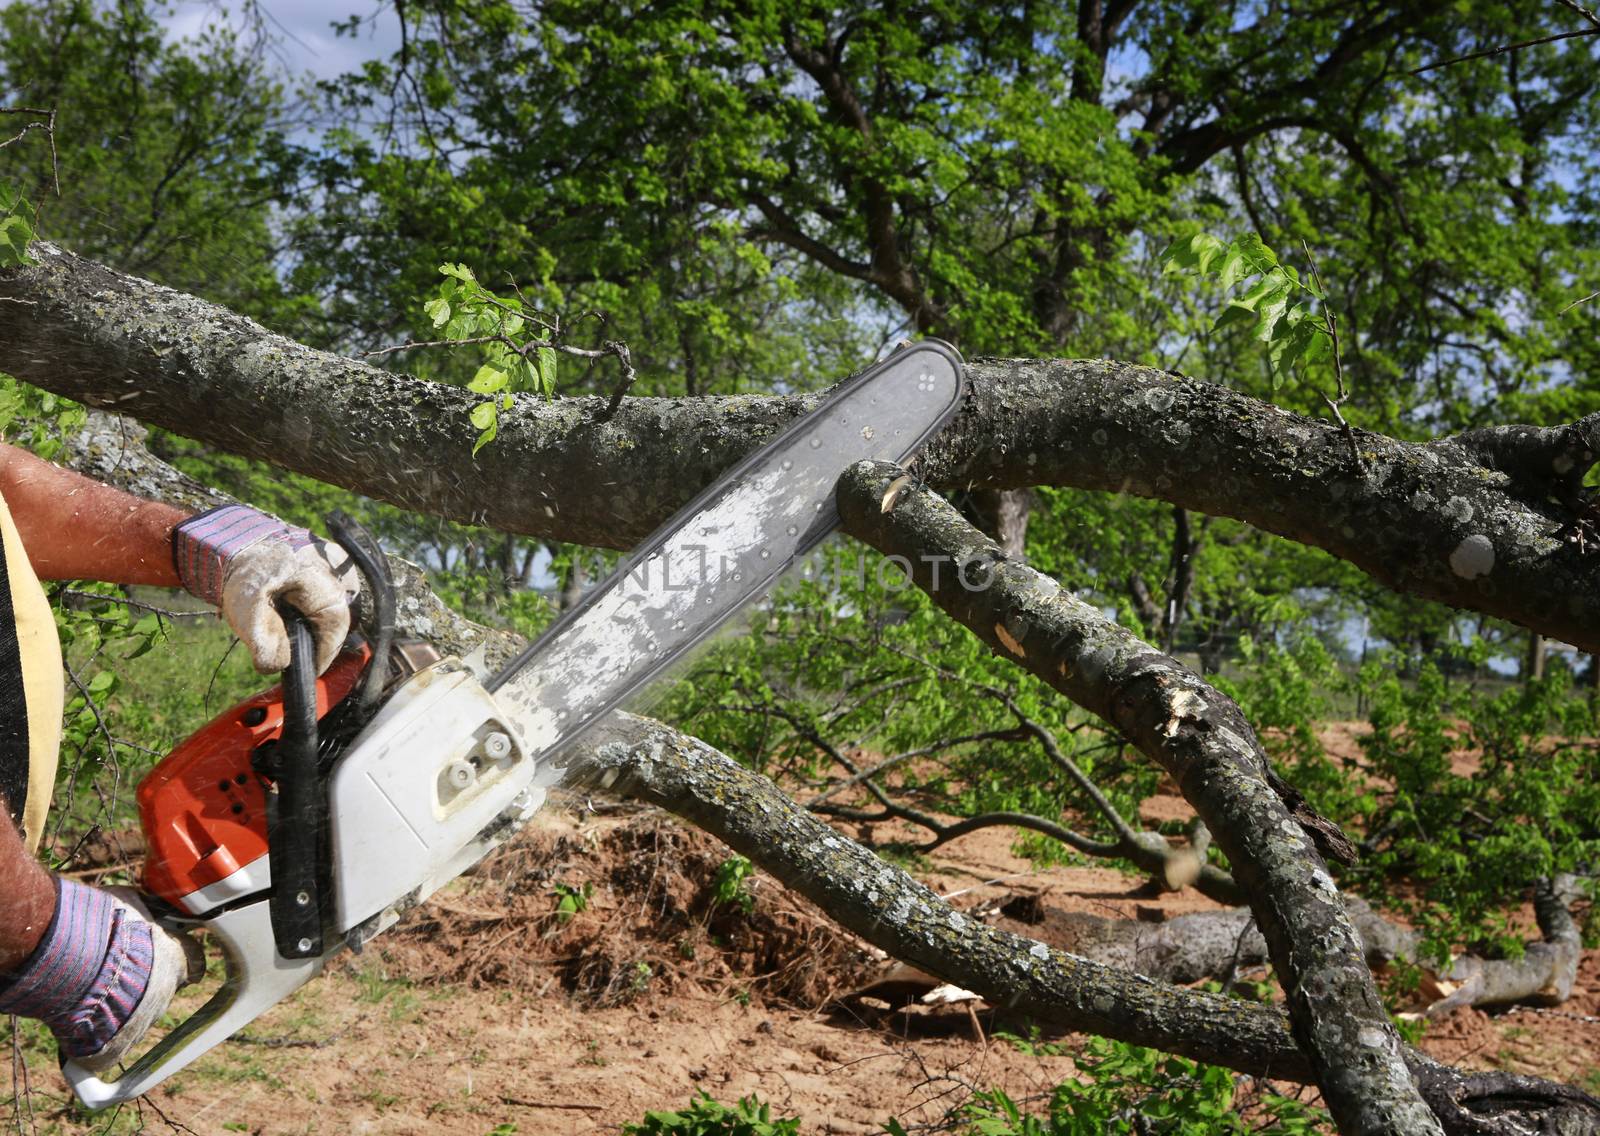 Professional is cutting trees using a chainsaw